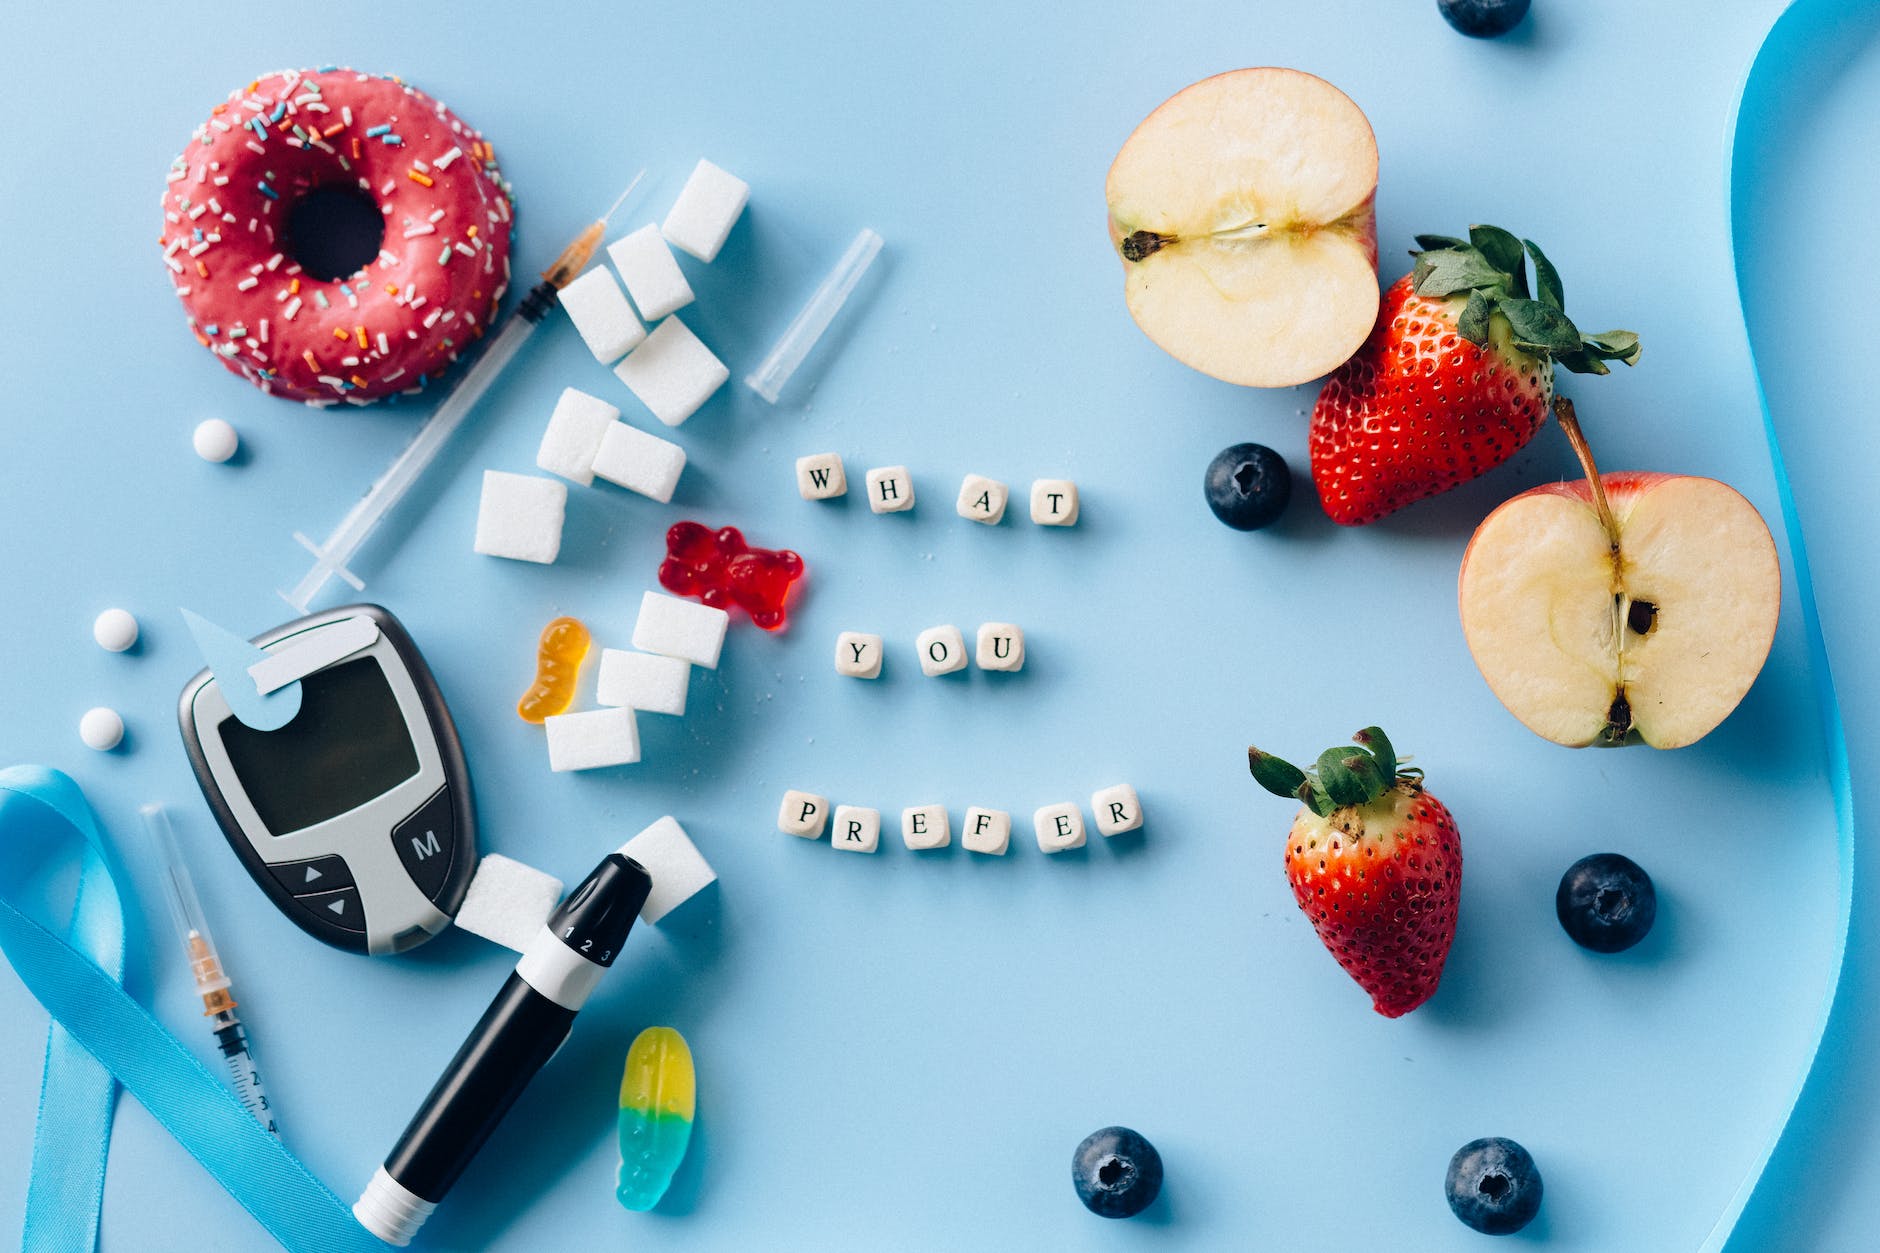 letter dices between fresh fruits and diabetes equipment on a blue surface